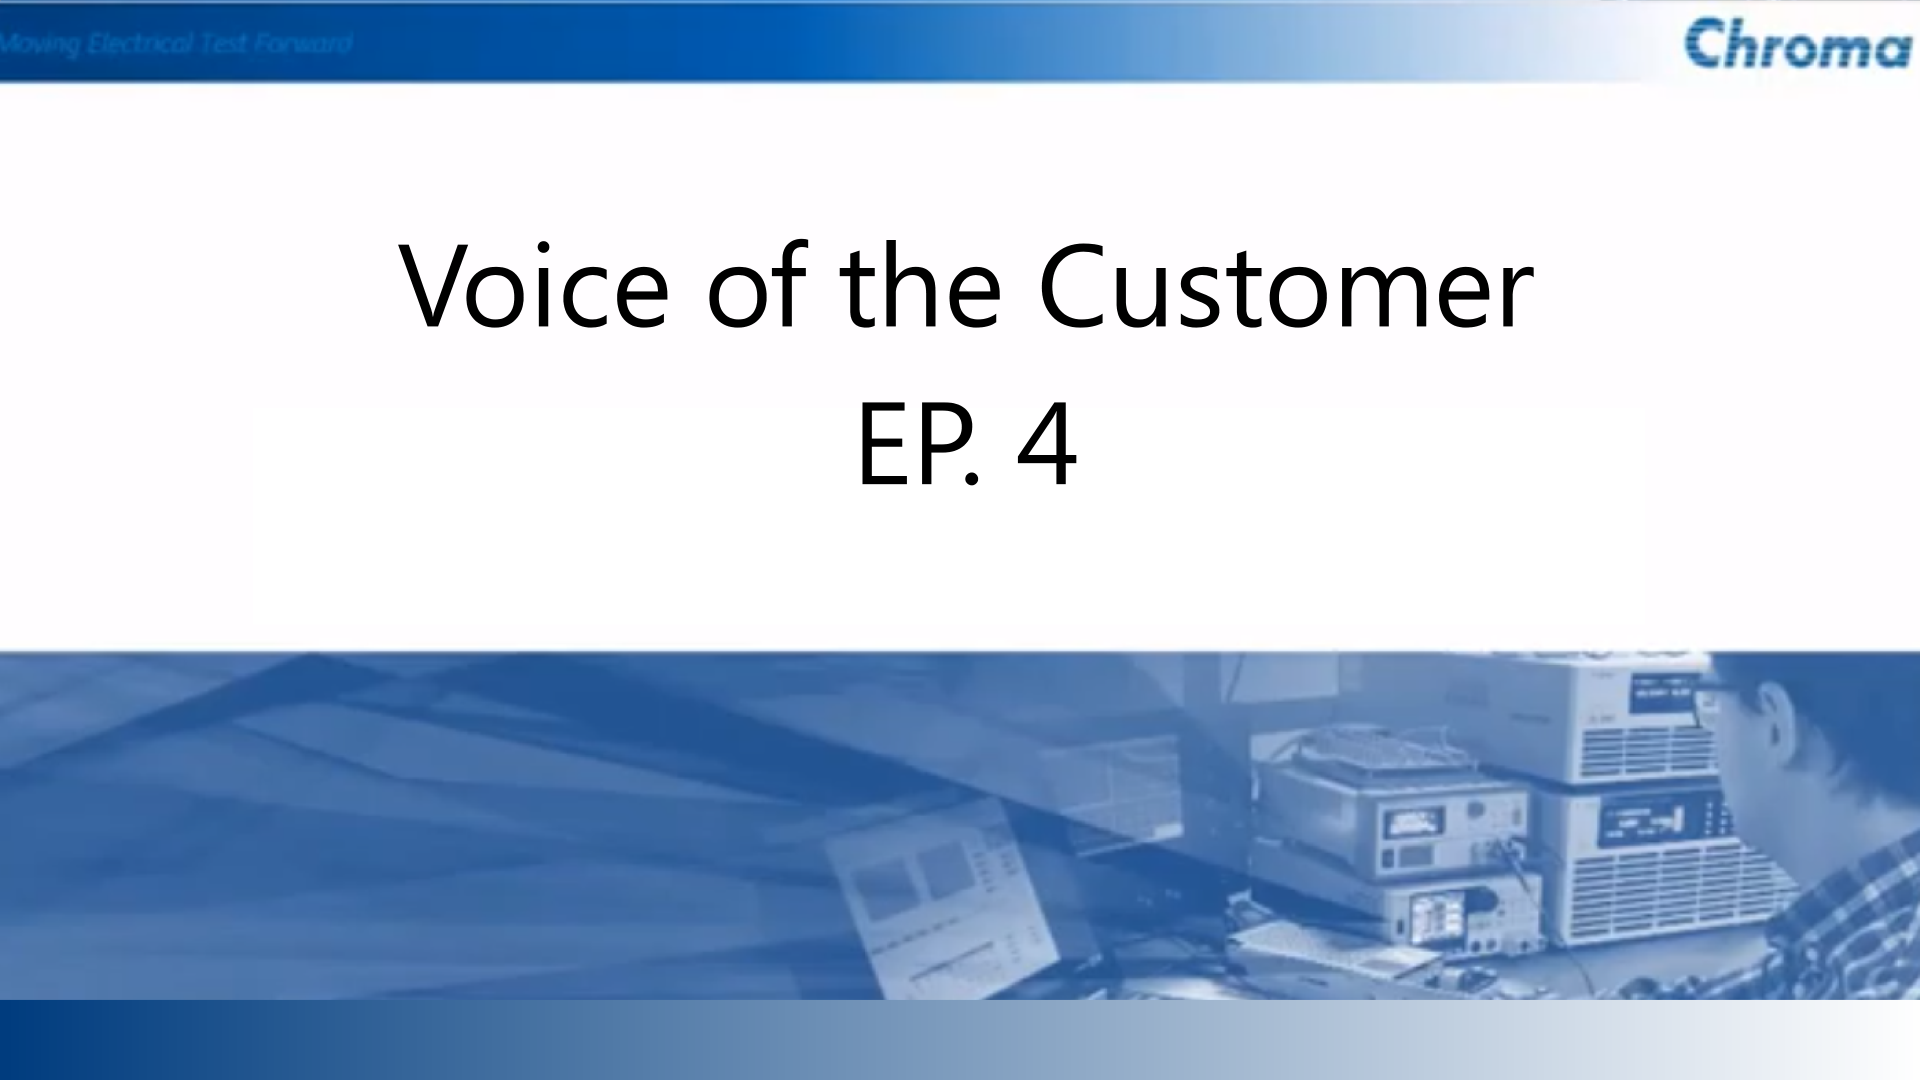 Voice of the Customer EP 4